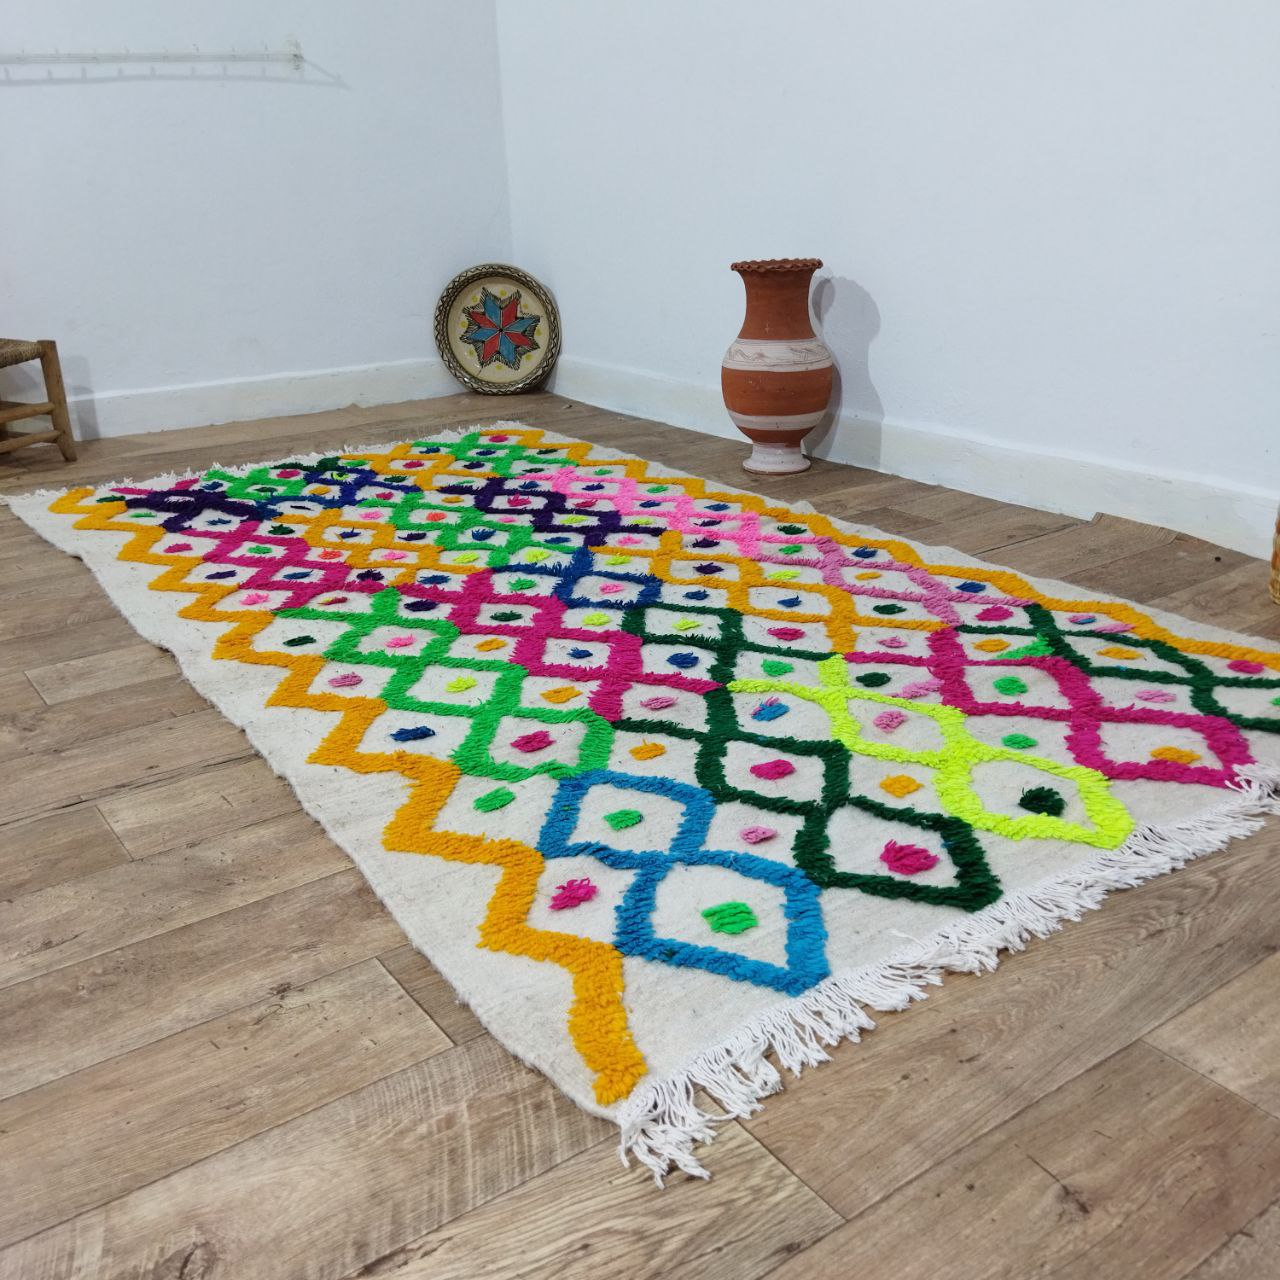 Authentic Multicolored Moroccan Azilal Berber Rugs - Handcrafted with Natural Wool